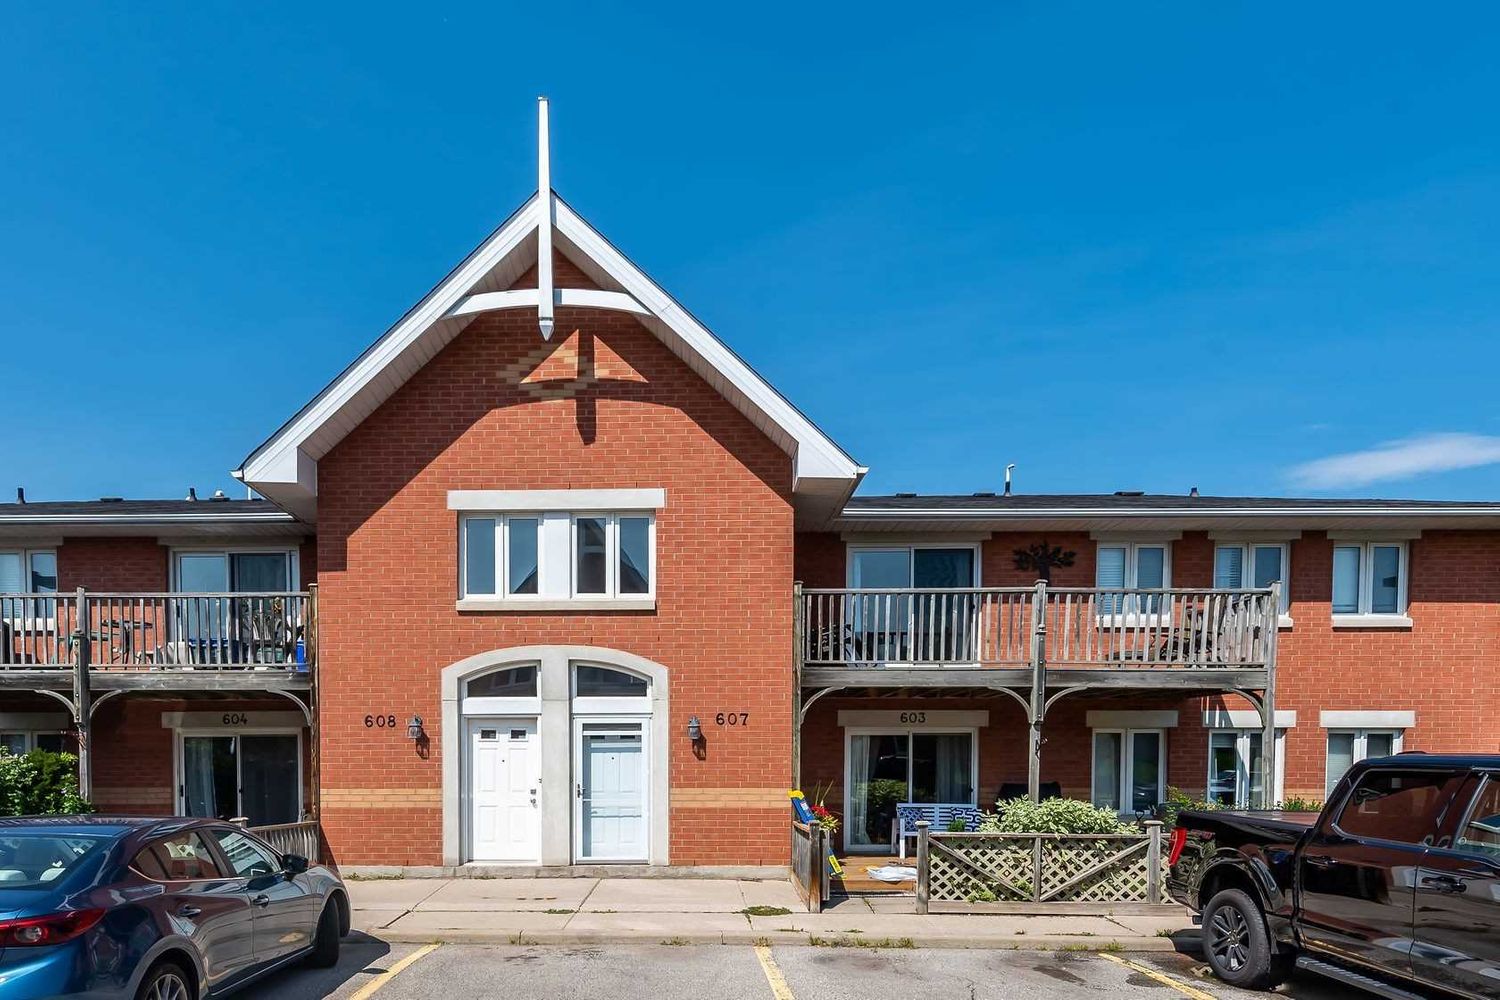 4140 Foxwood Drive. 4140 Foxwood Drive Townhomes is located in  Burlington, Toronto - image #2 of 2